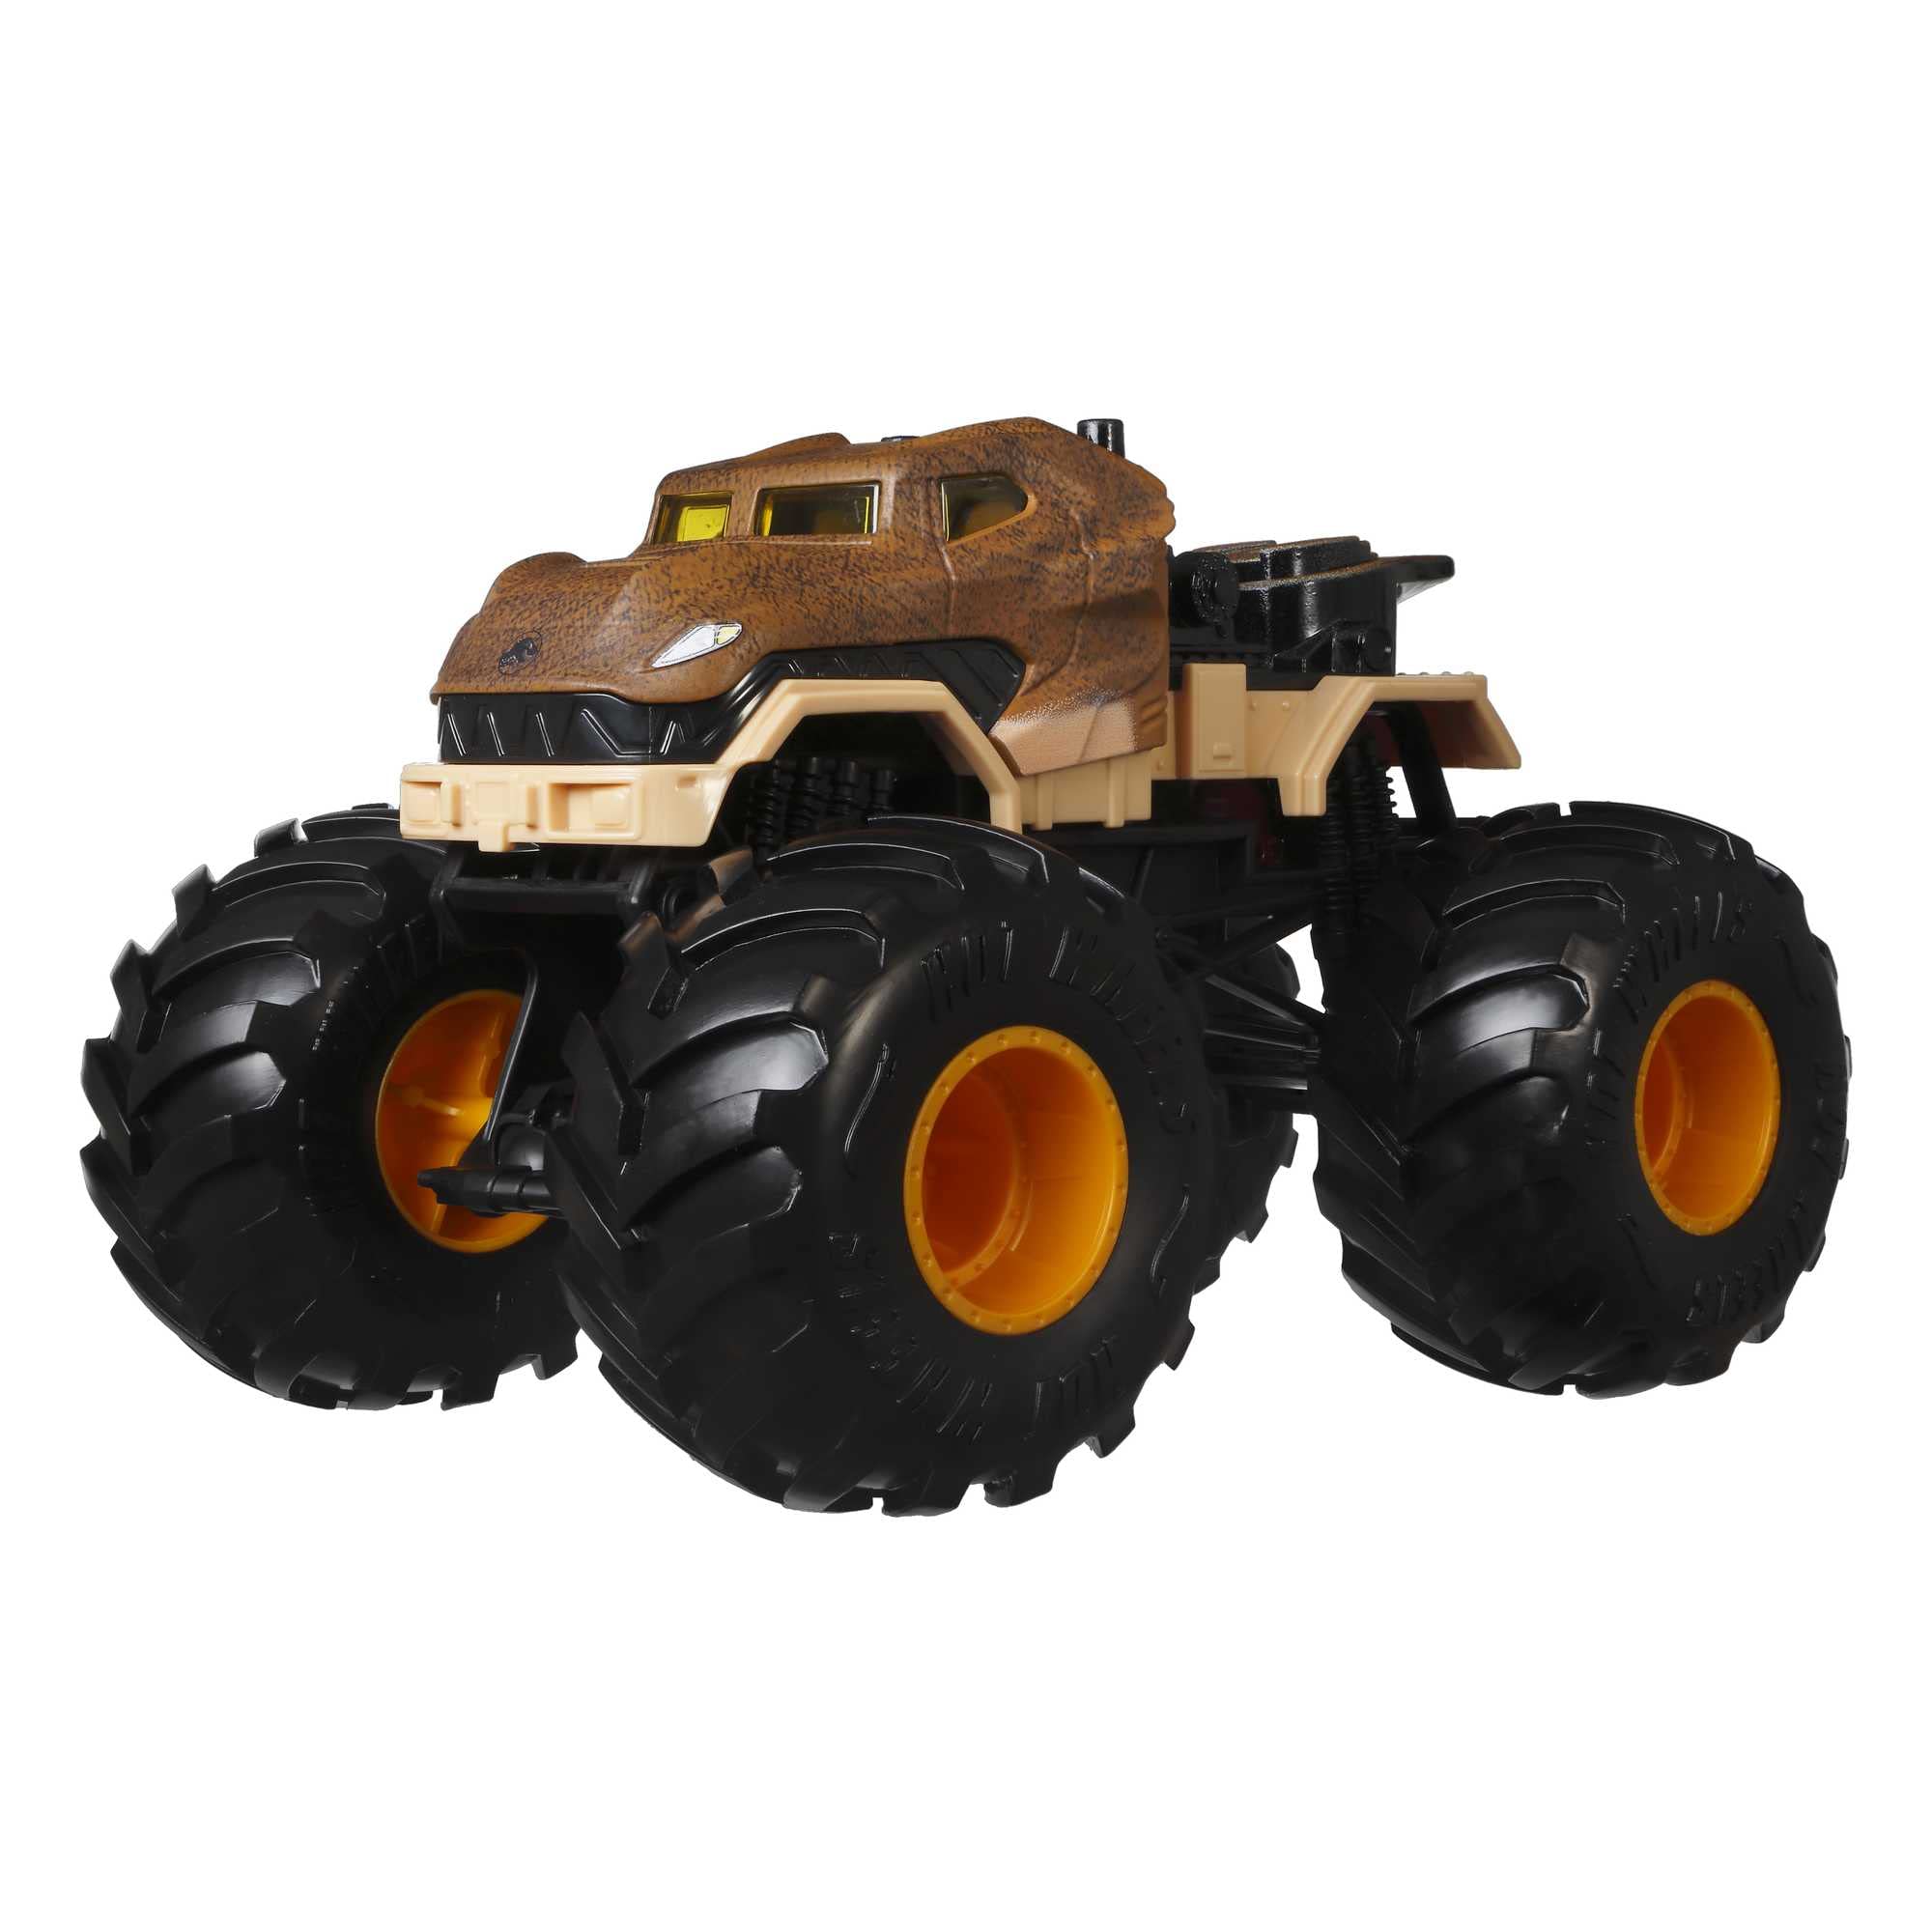 Hot Wheels Monster Trucks, Oversized Monster Truck, 1:24 Scale Die-Cast Toy Truck with Giant Wheels and Cool Designs